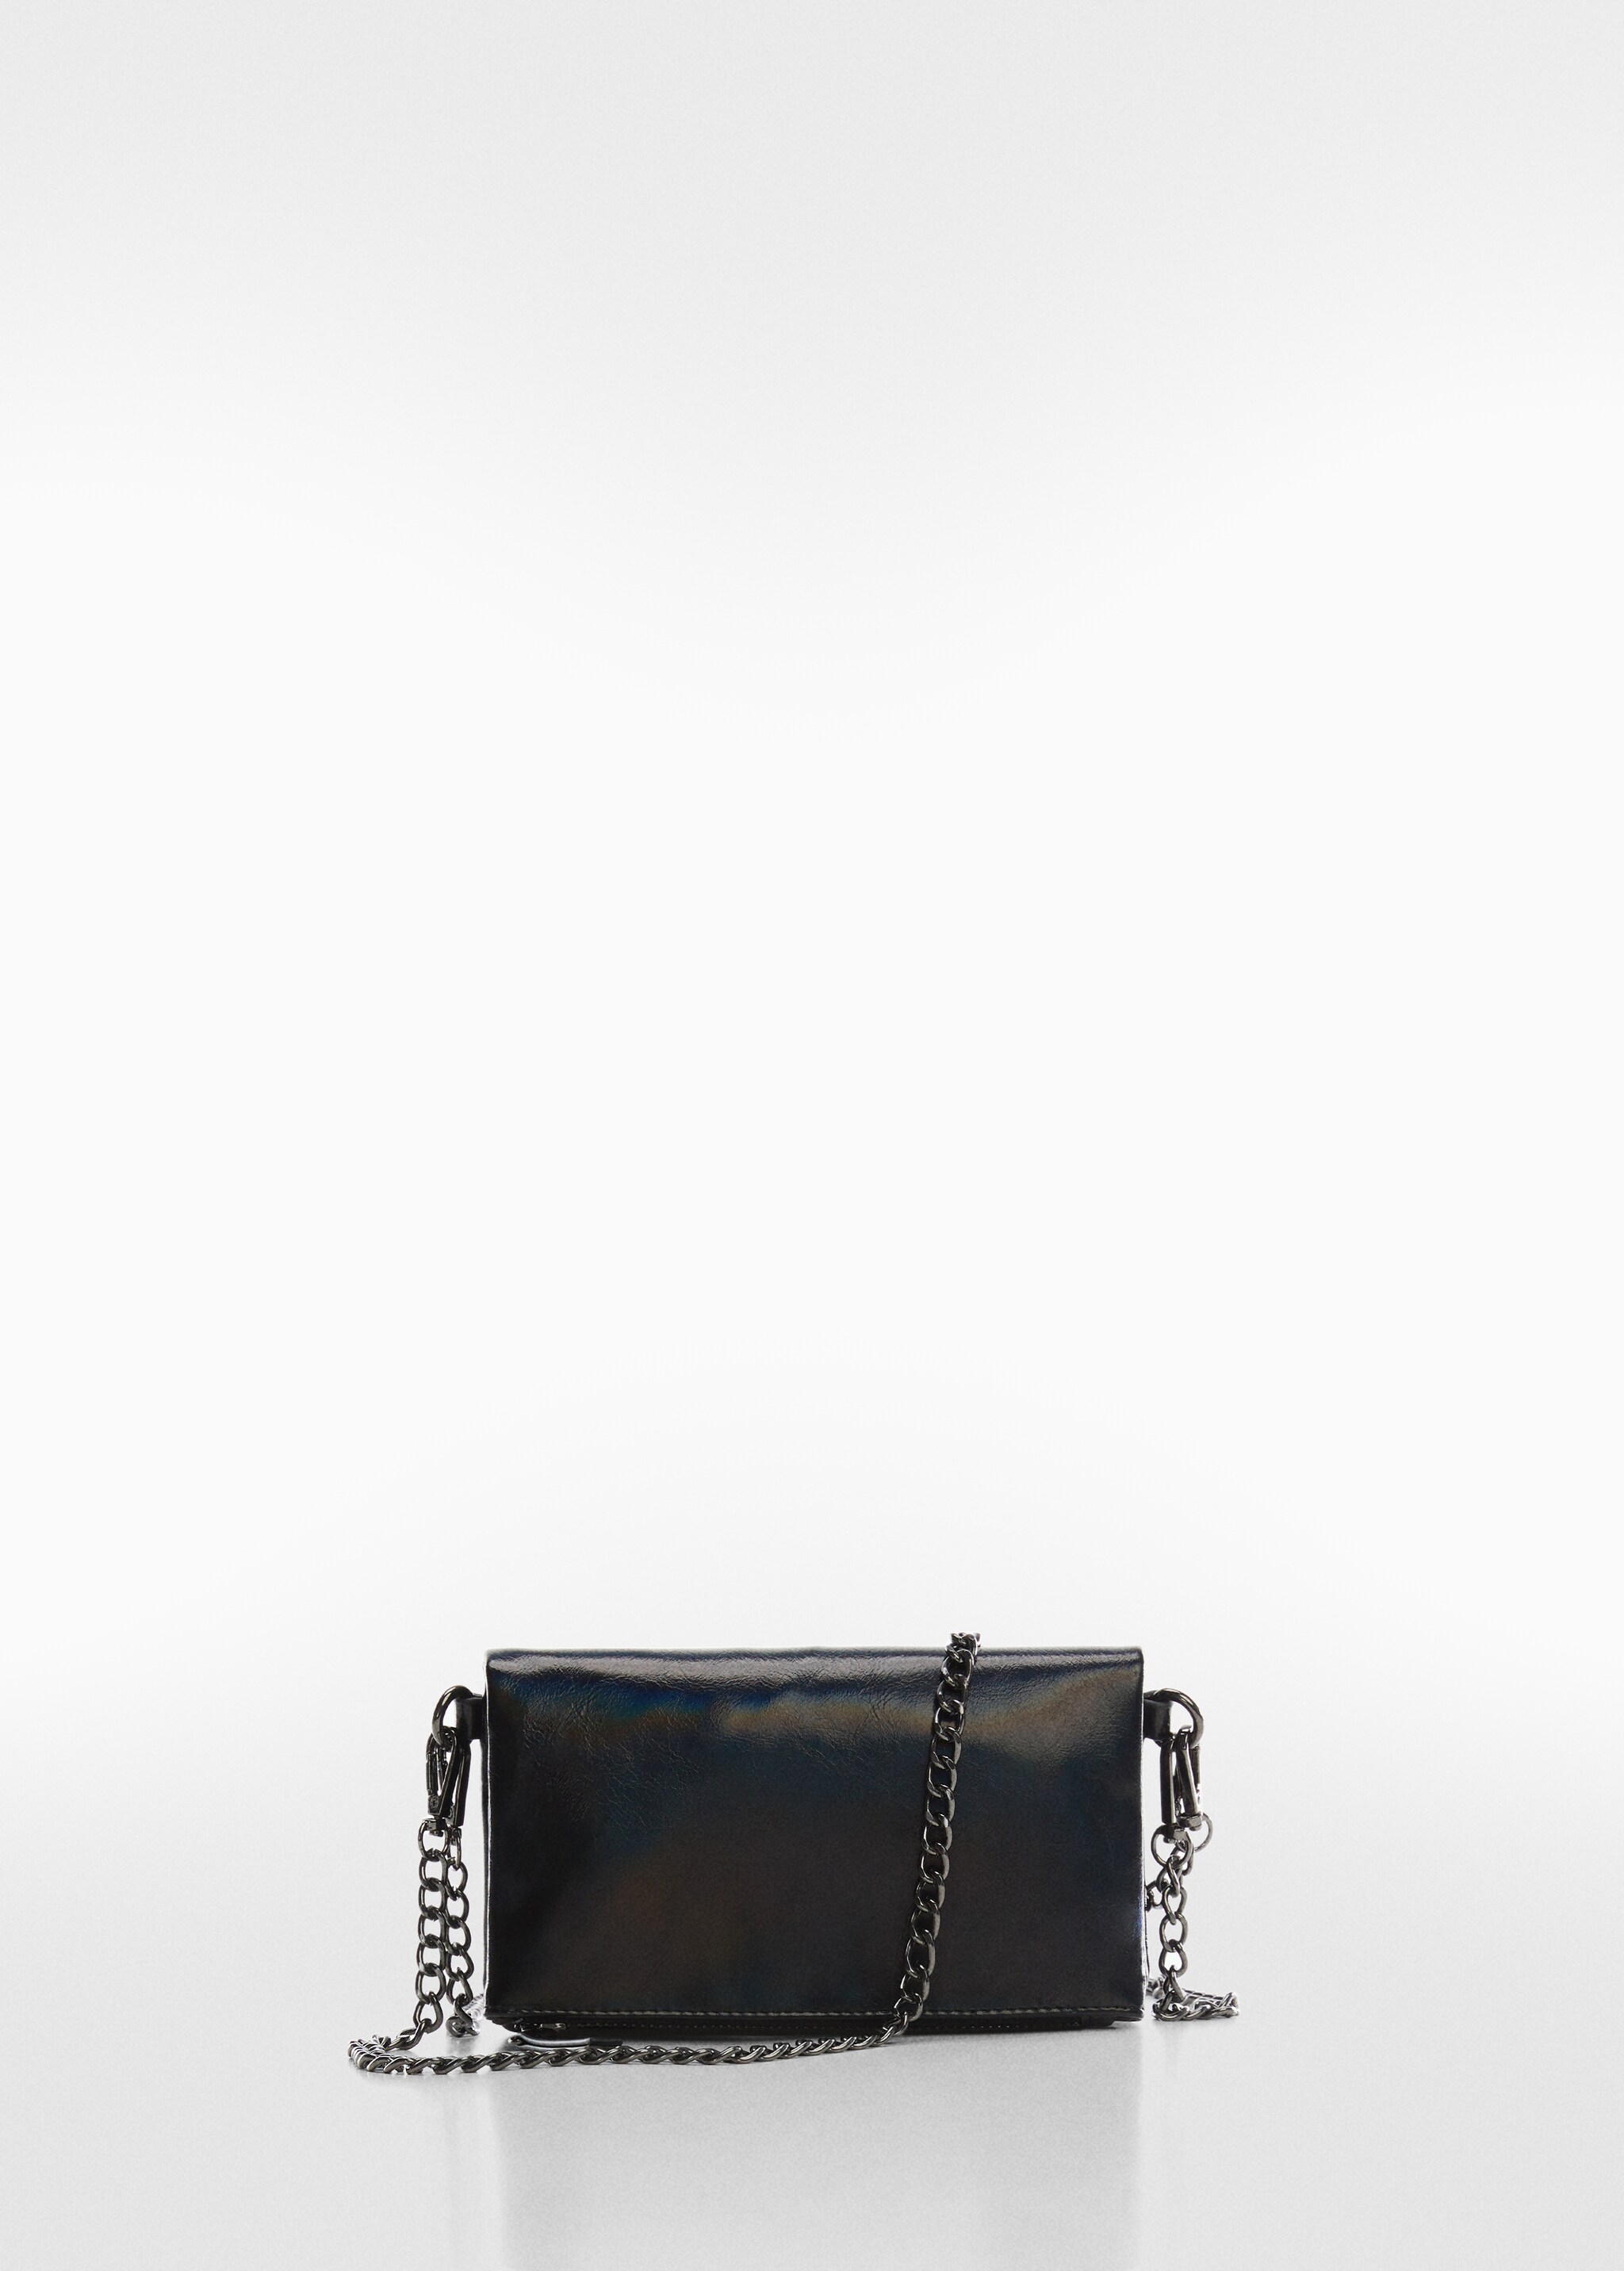 Flap chain bag - Article without model